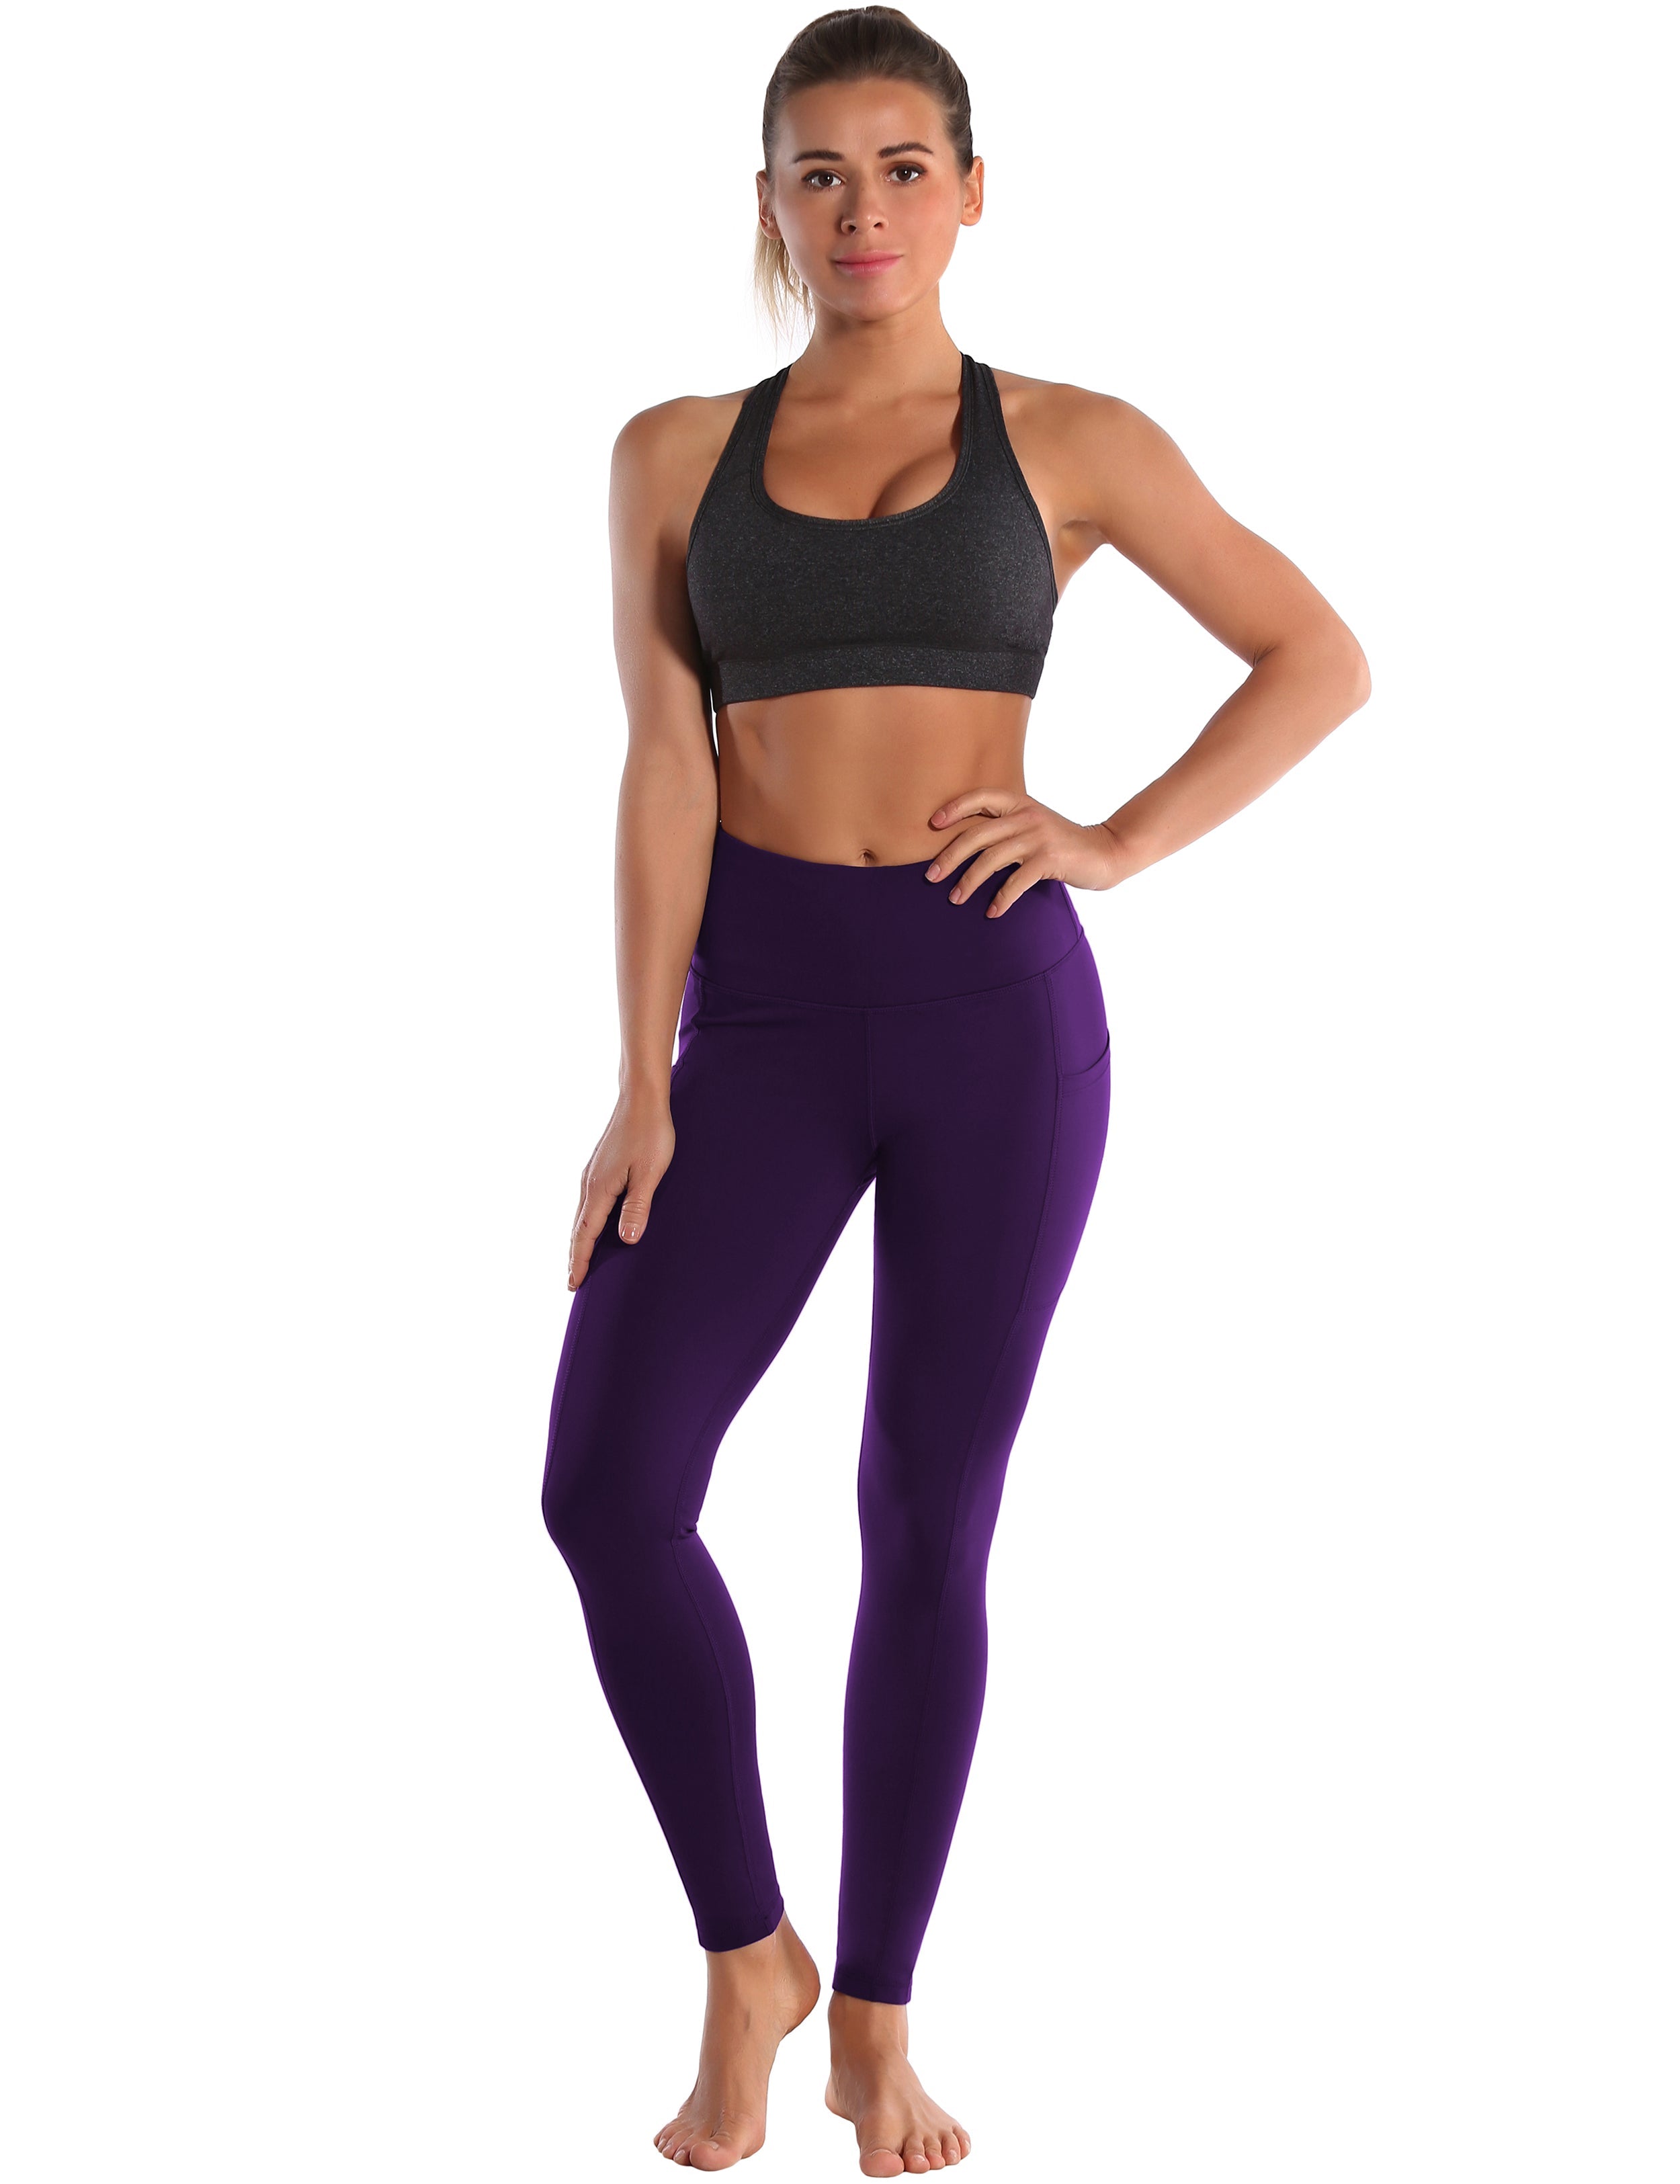 Hip Line Side Pockets Pilates Pants eggplantpurple Sexy Hip Line Side Pockets 75%Nylon/25%Spandex Fabric doesn't attract lint easily 4-way stretch No see-through Moisture-wicking Tummy control Inner pocket Two lengths